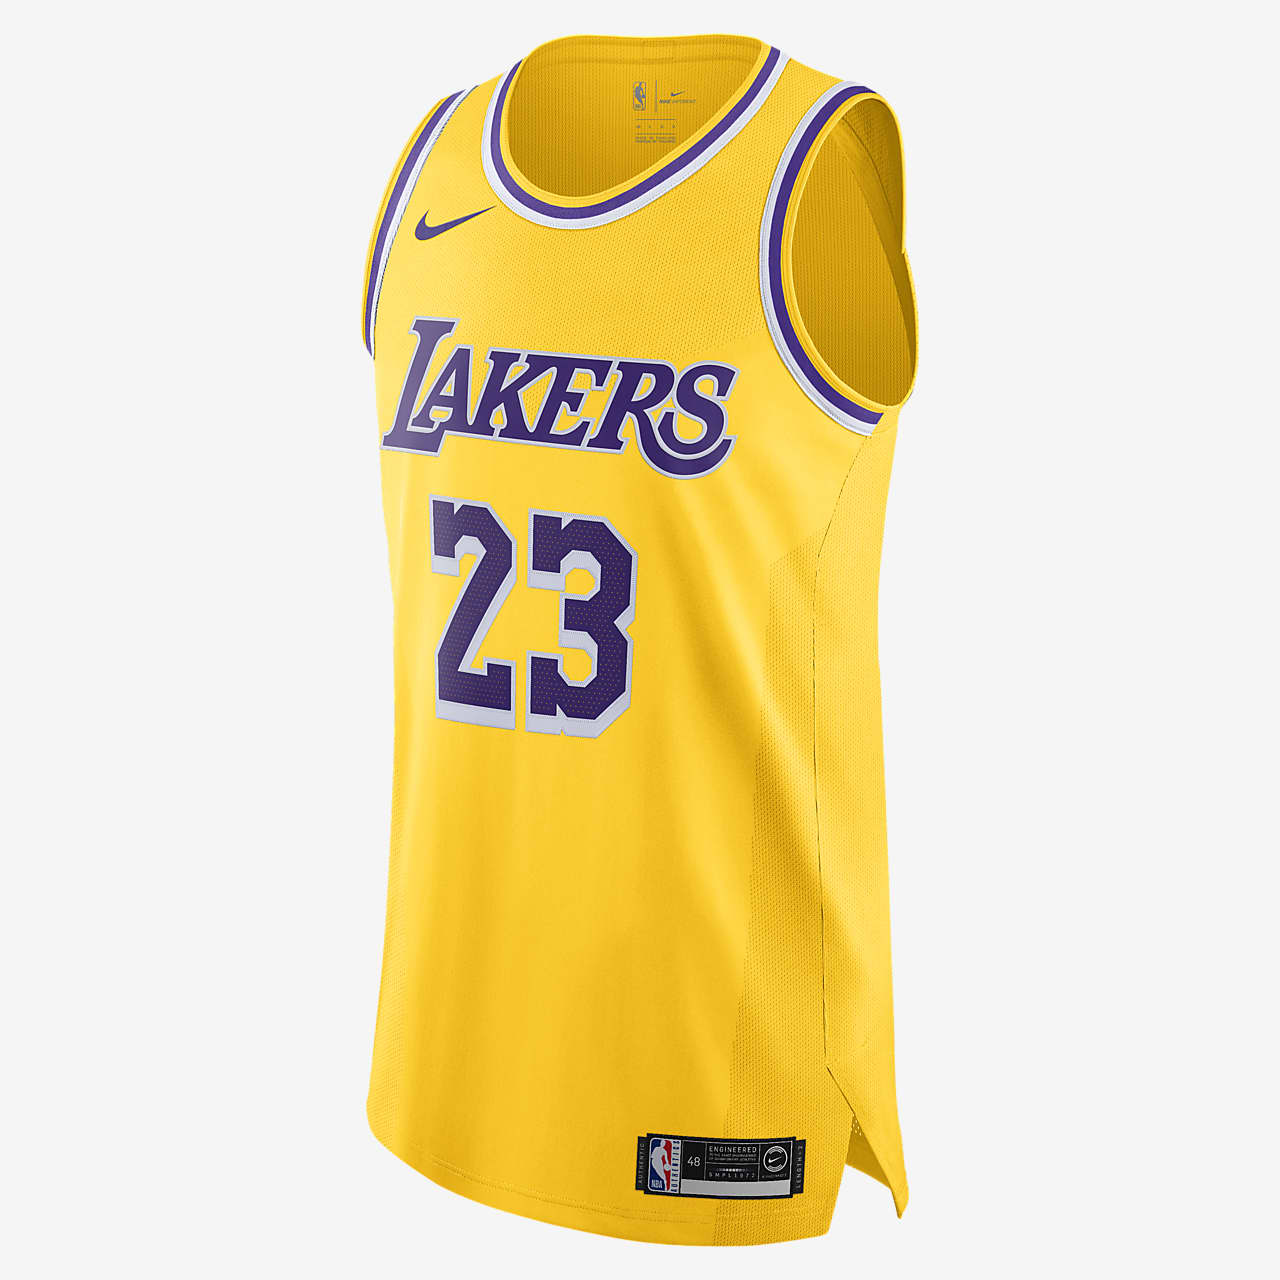 Lebron Black Jersey Lakers Outlet Sale, UP TO 57% OFF